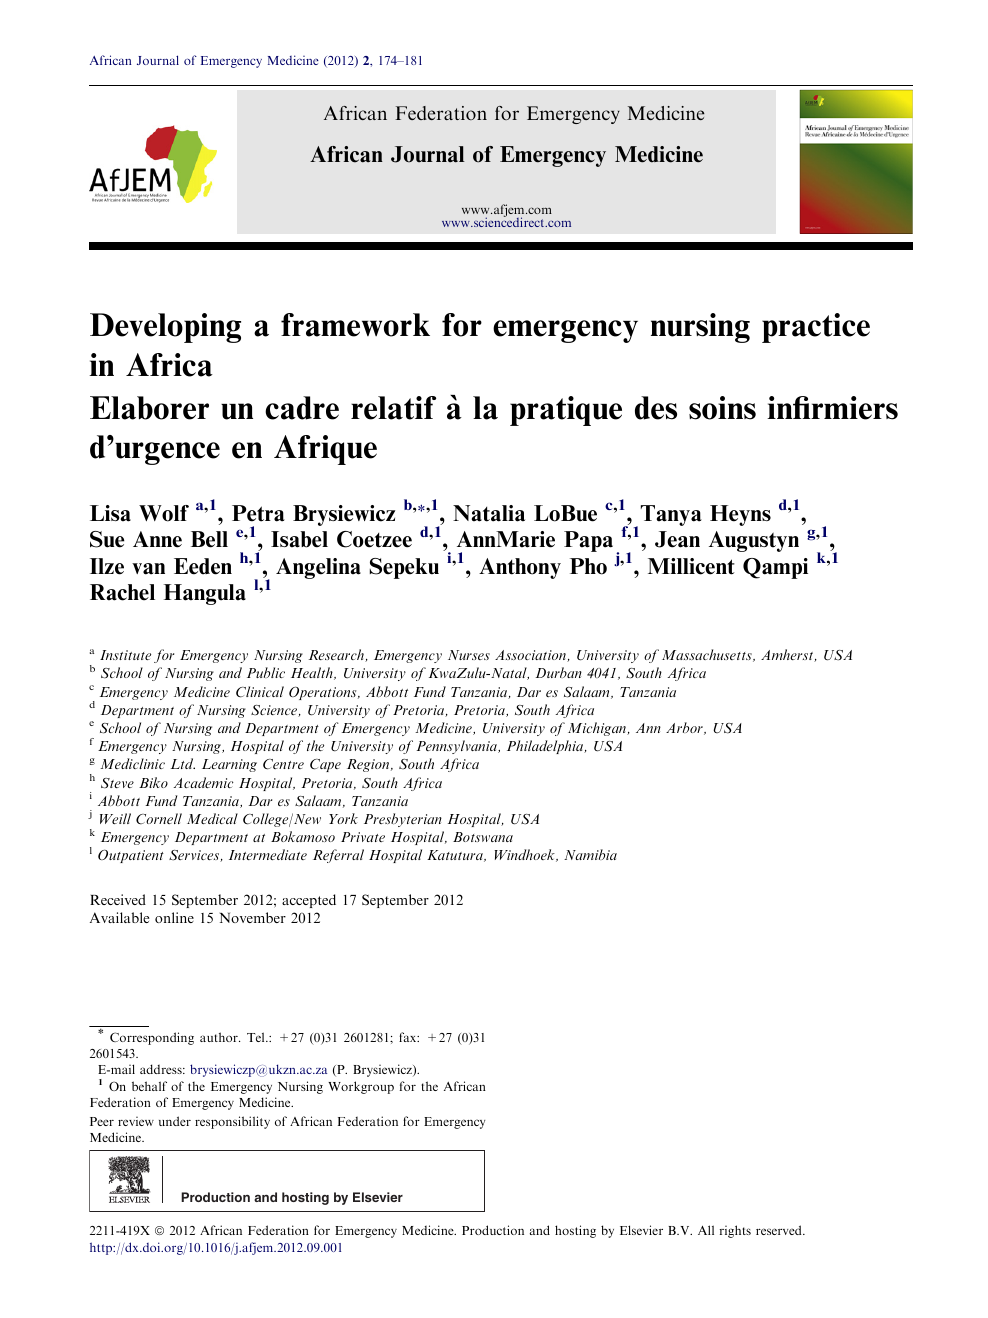 Developing A Framework For Emergency Nursing Practice In Africa Topic Of Research Paper In Economics And Business Download Scholarly Article Pdf And Read For Free On Cyberleninka Open Science Hub